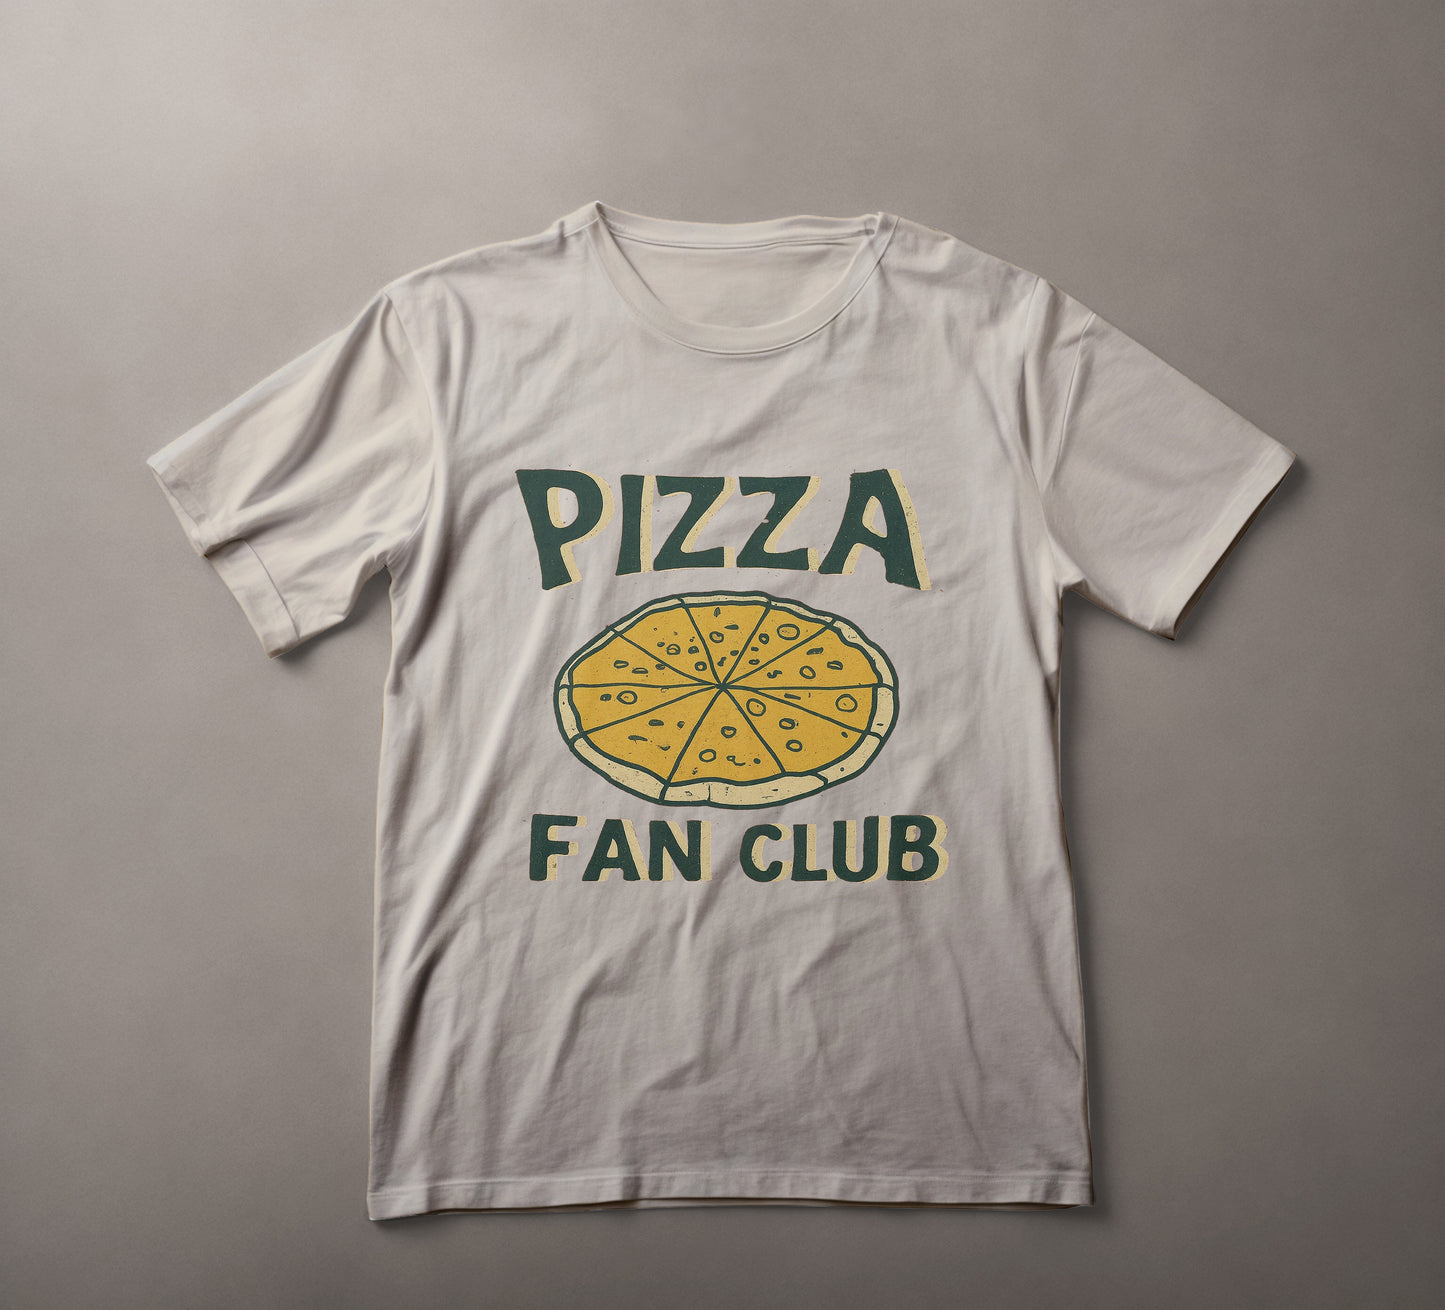 Pizza Lovers T-shirt, Cheesy Slice Apparel, Pizza Fan Club Gear, Foodie Fashion Tee, Casual Culinary Clothing, Fun Pizza Party Shirt, Comfort Food Wear, Pizzeria Style Top, Delicious Meal Merchandise, Pizza Slice Graphic Tee